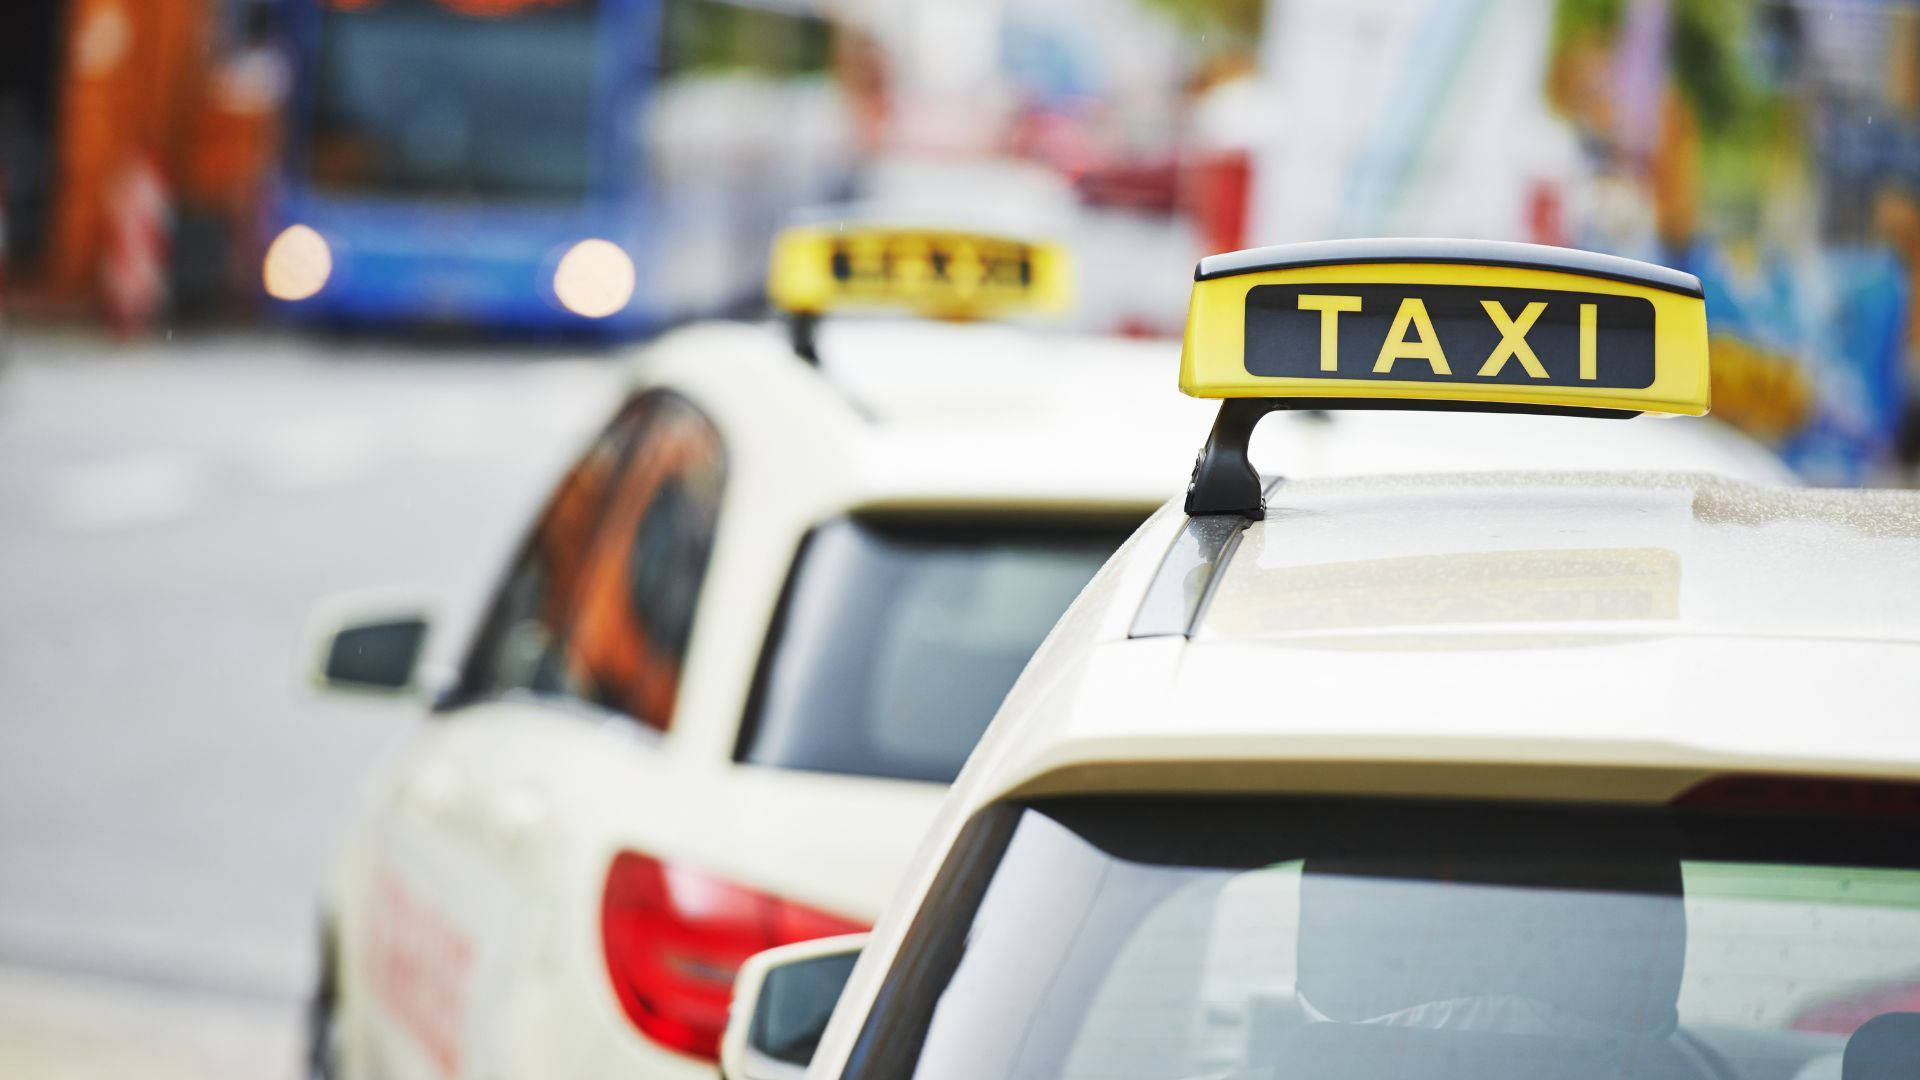 Iconic Black and Yellow Taxi with Rooftop Sign in a Cityscape Wallpaper